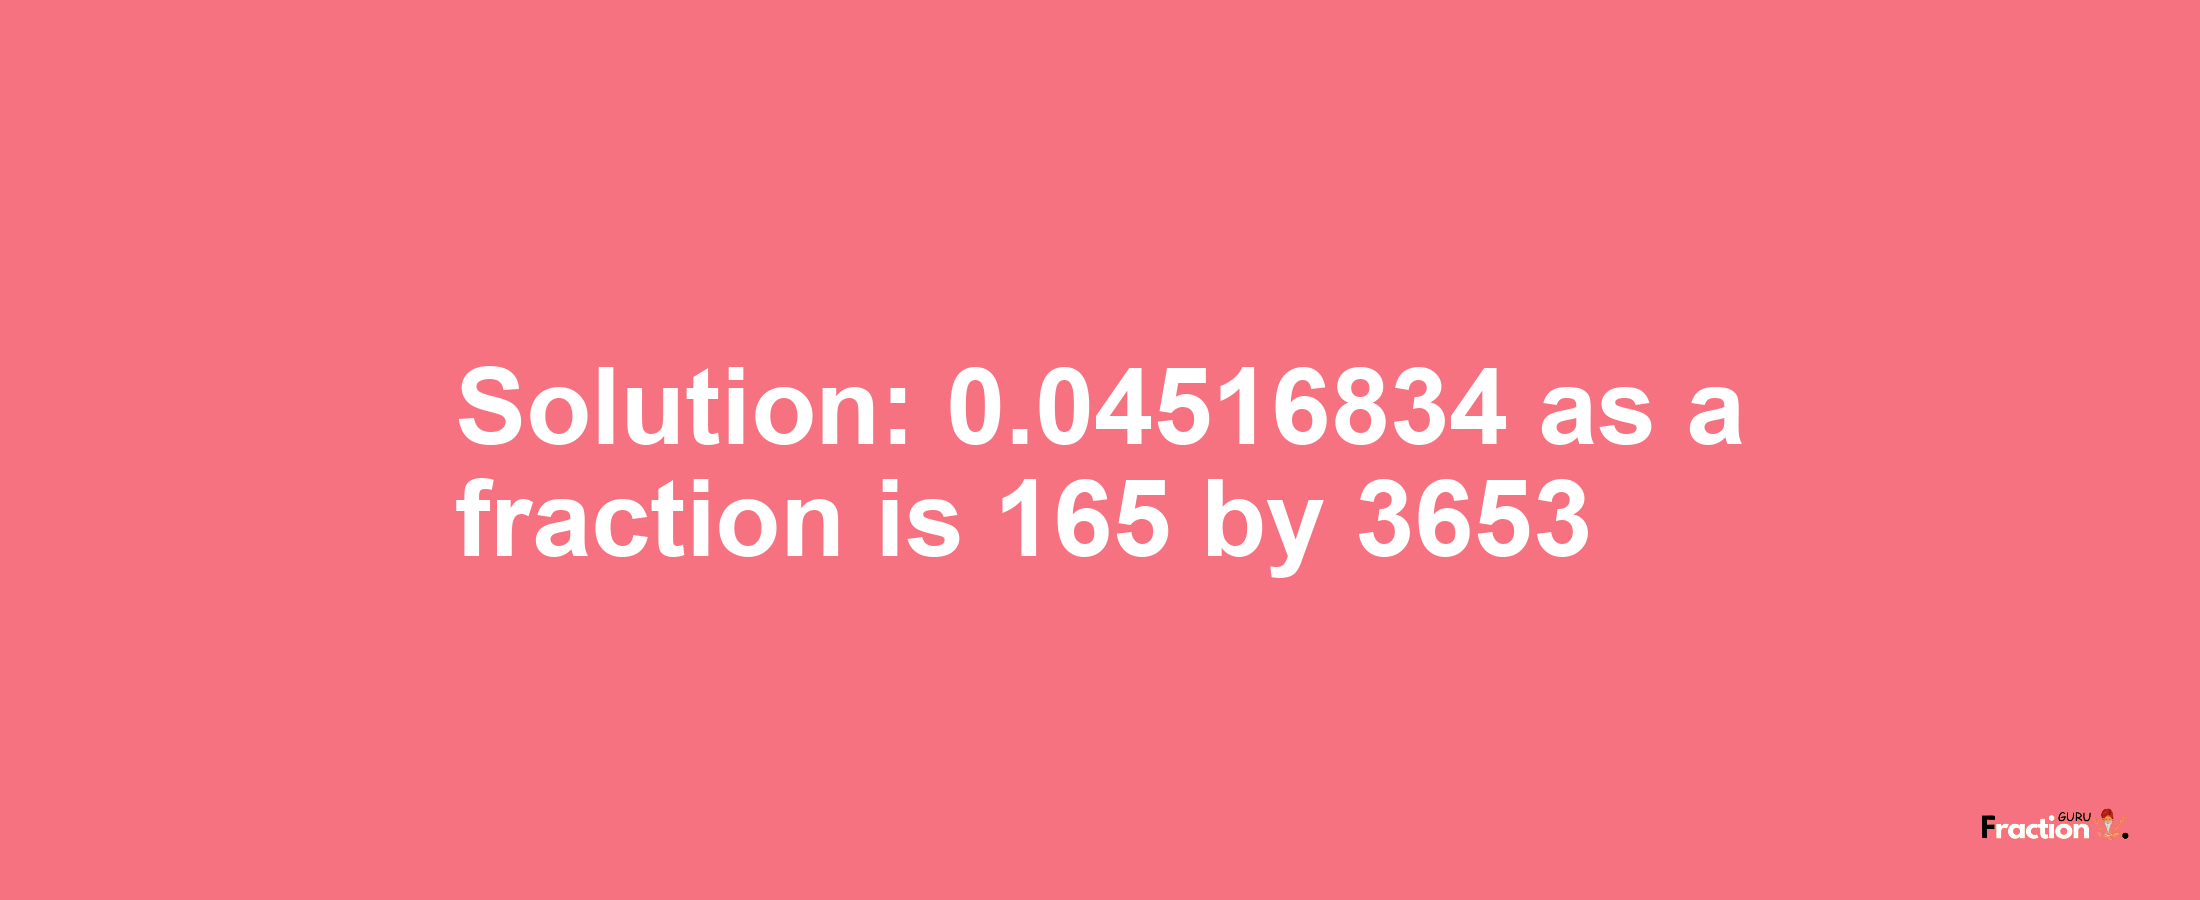 Solution:0.04516834 as a fraction is 165/3653